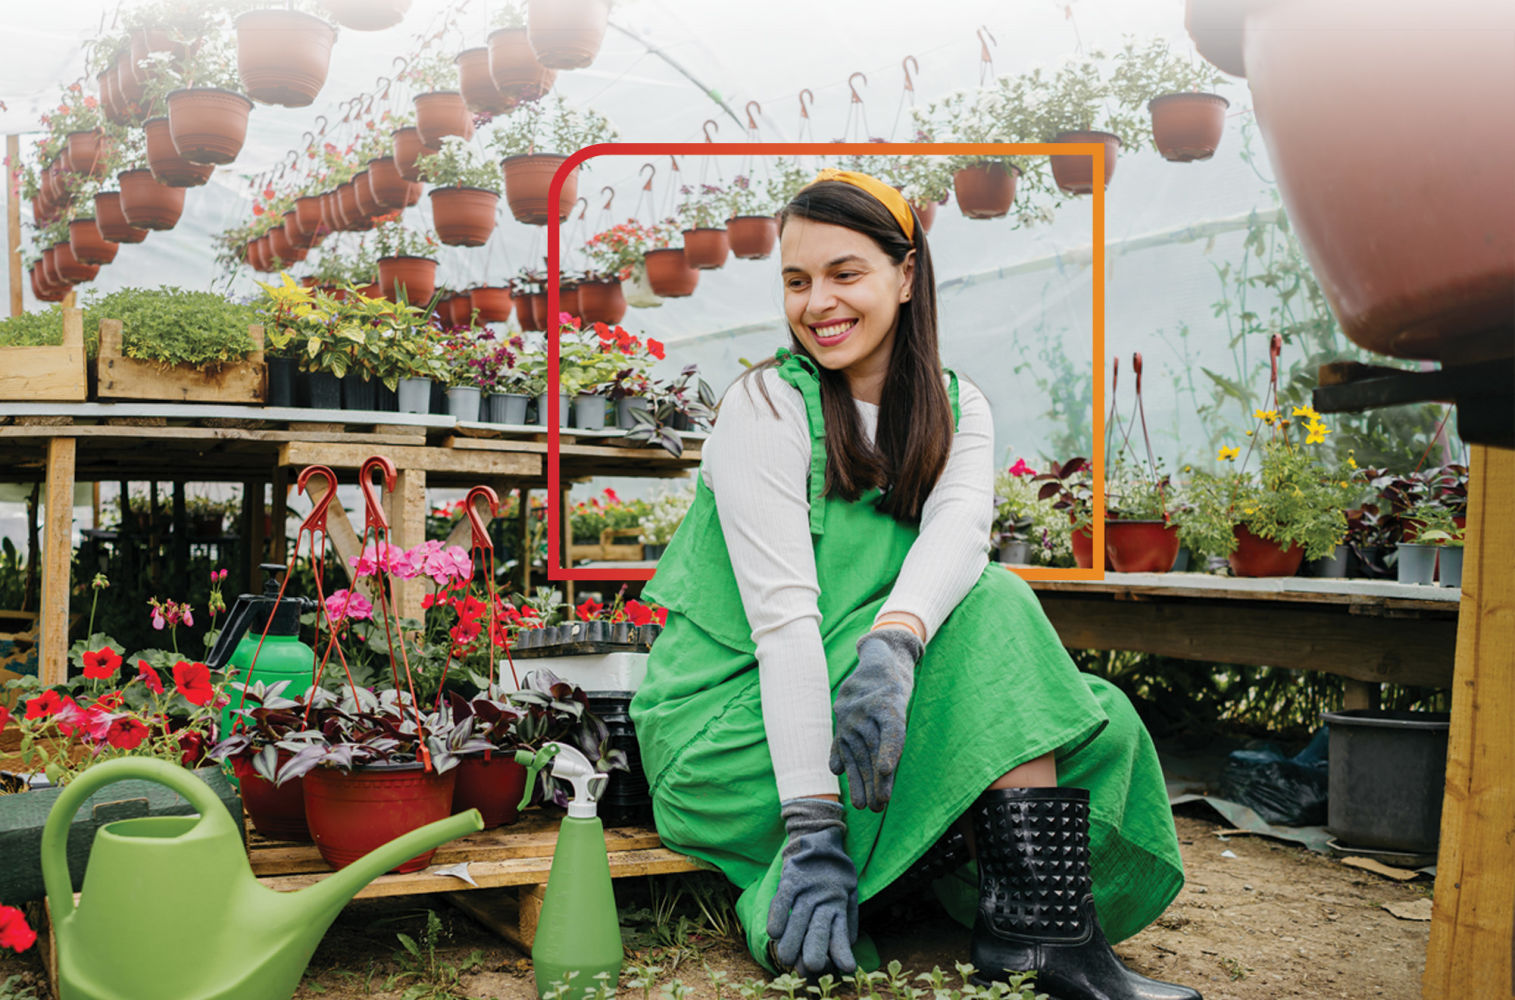 Woman with awesome rain boots tending to her garden inside a greenhouse. She loves being a Financial Center member!